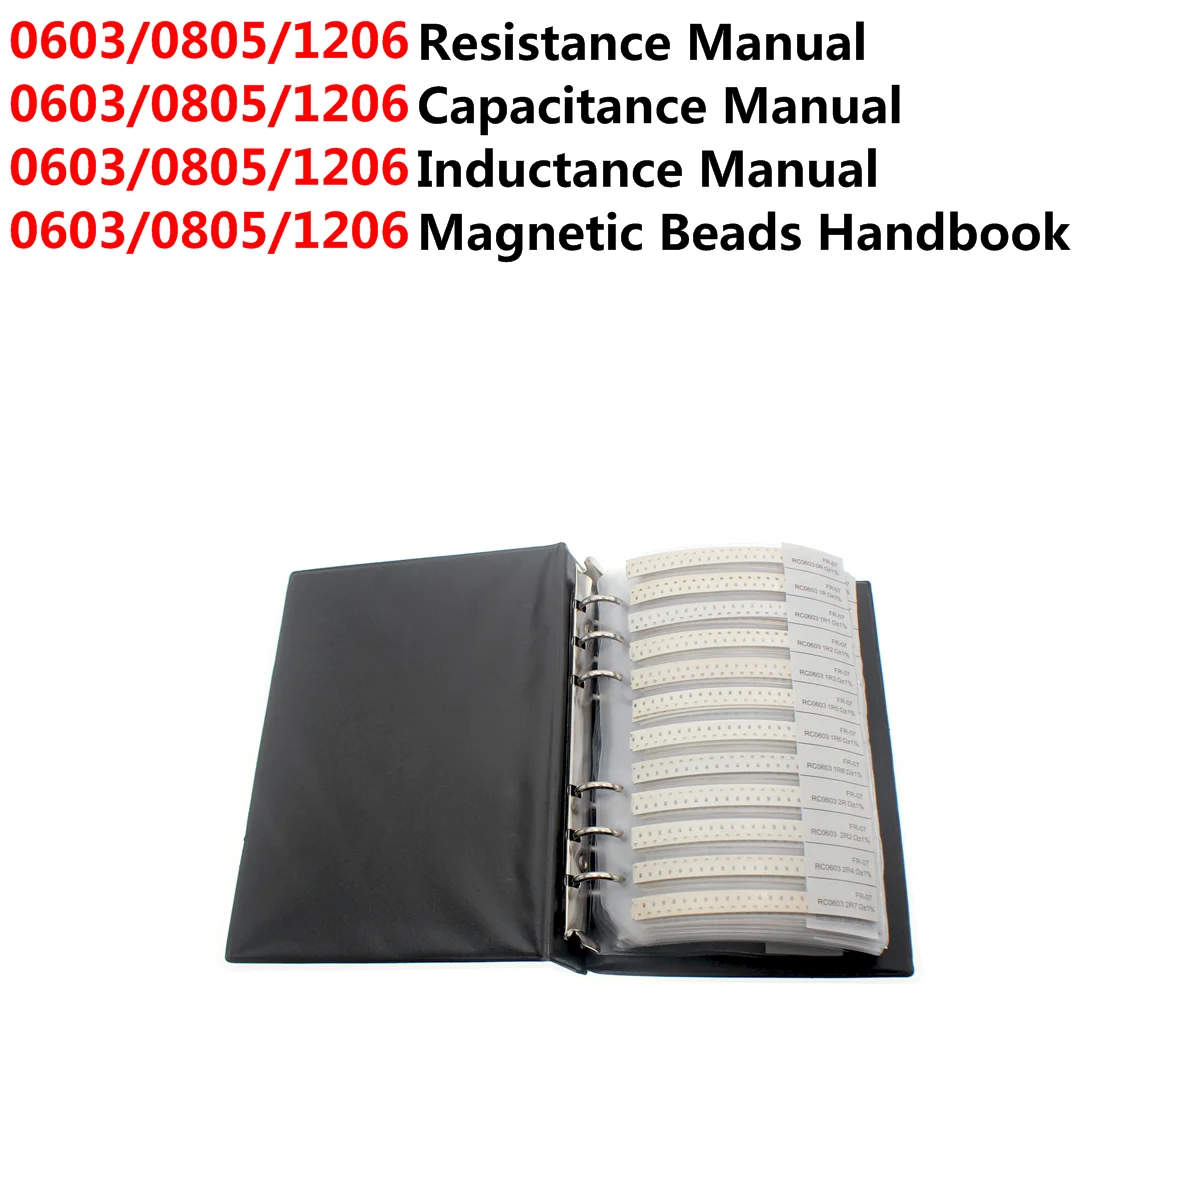 0603 0805 1206 Resistor Capacitor inductance magnetic bead Sample Book ibuw SMD Assorted Kit ferrite bead sample book 0402 0603 0805 1206 smd magnetic laminated sheet magnetic beads sample book sample assorted kit set